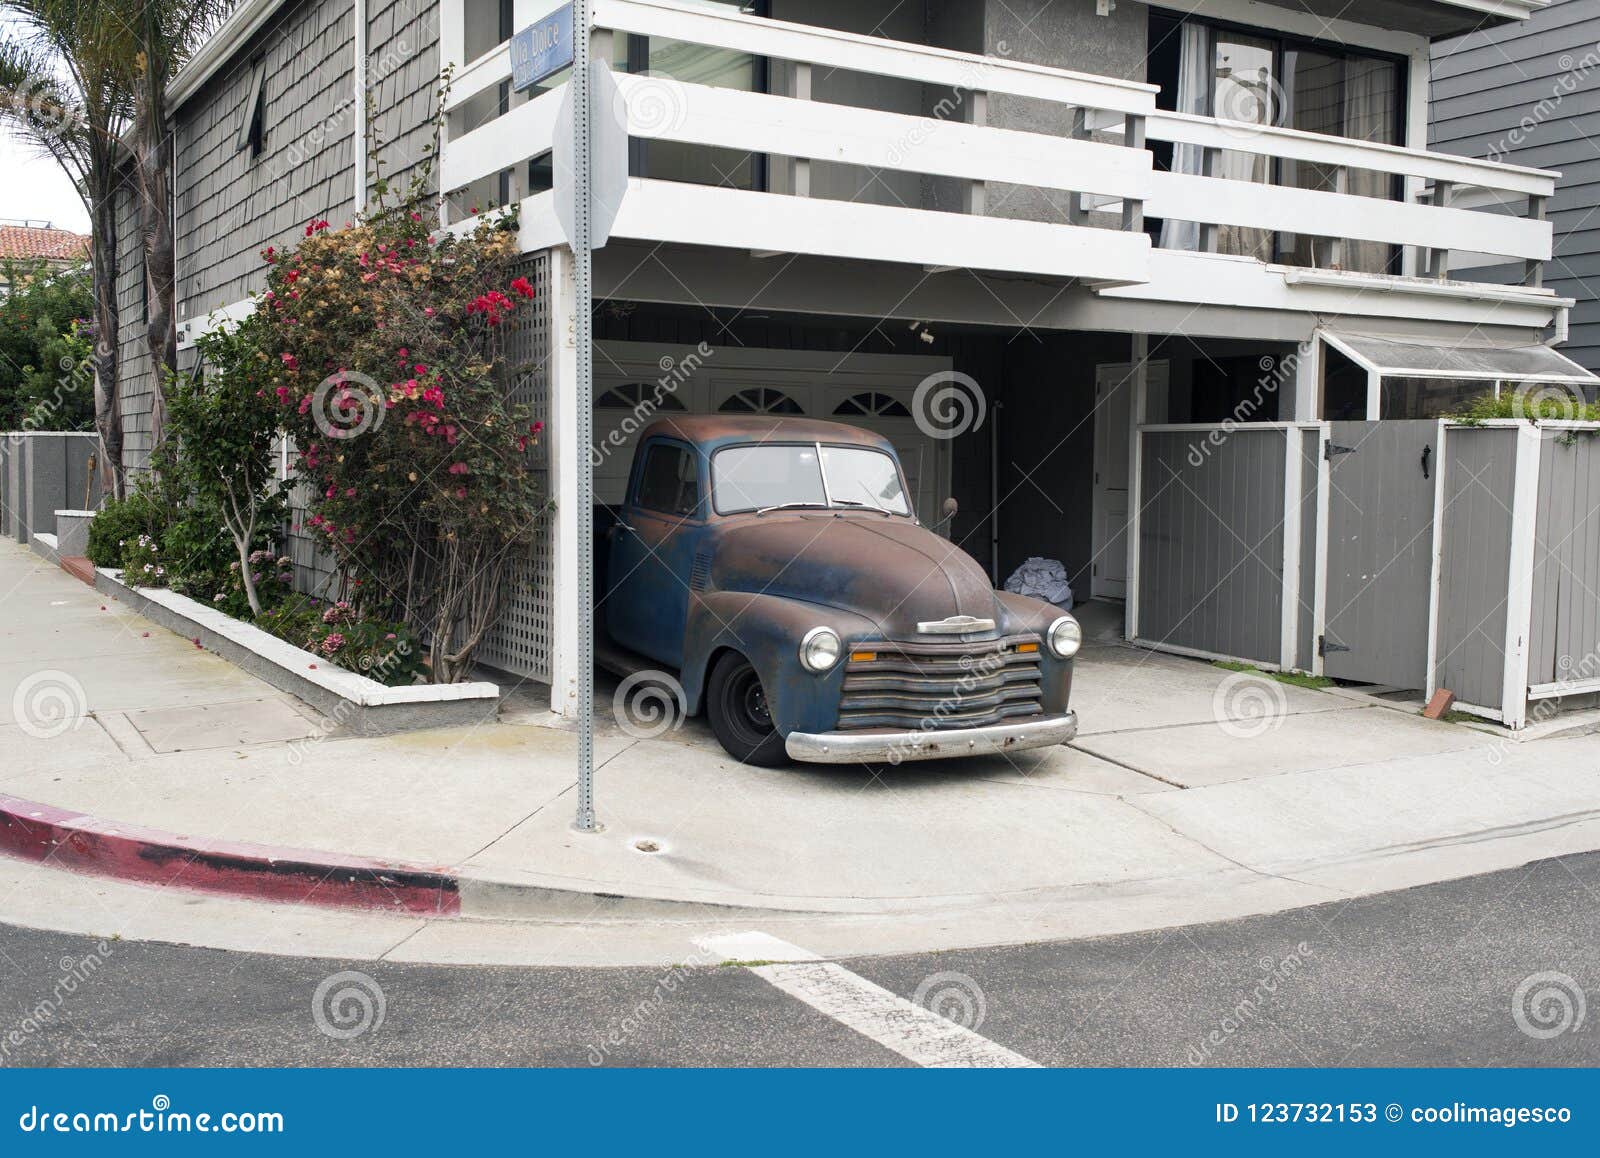 a vintage pick up car in the street in venice, california